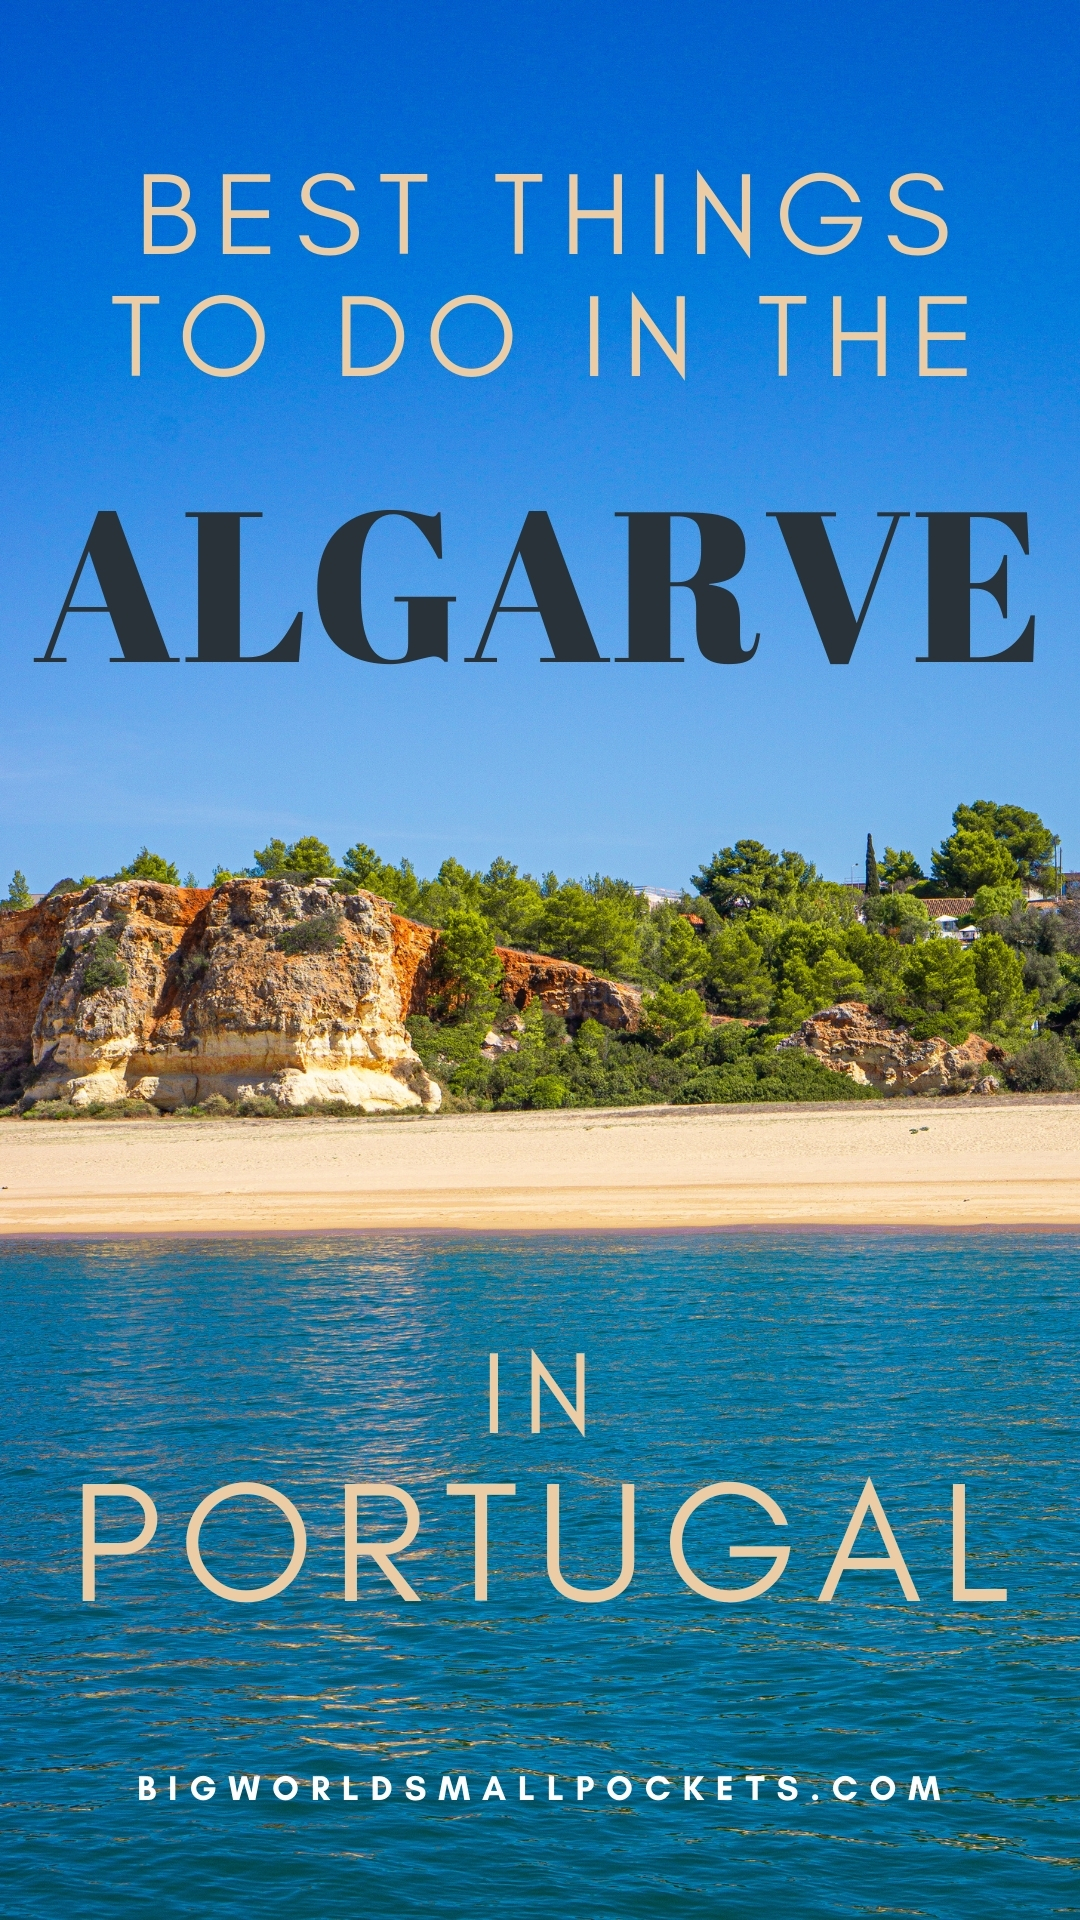 13 Best Things To Do in the Algarve, Portugal